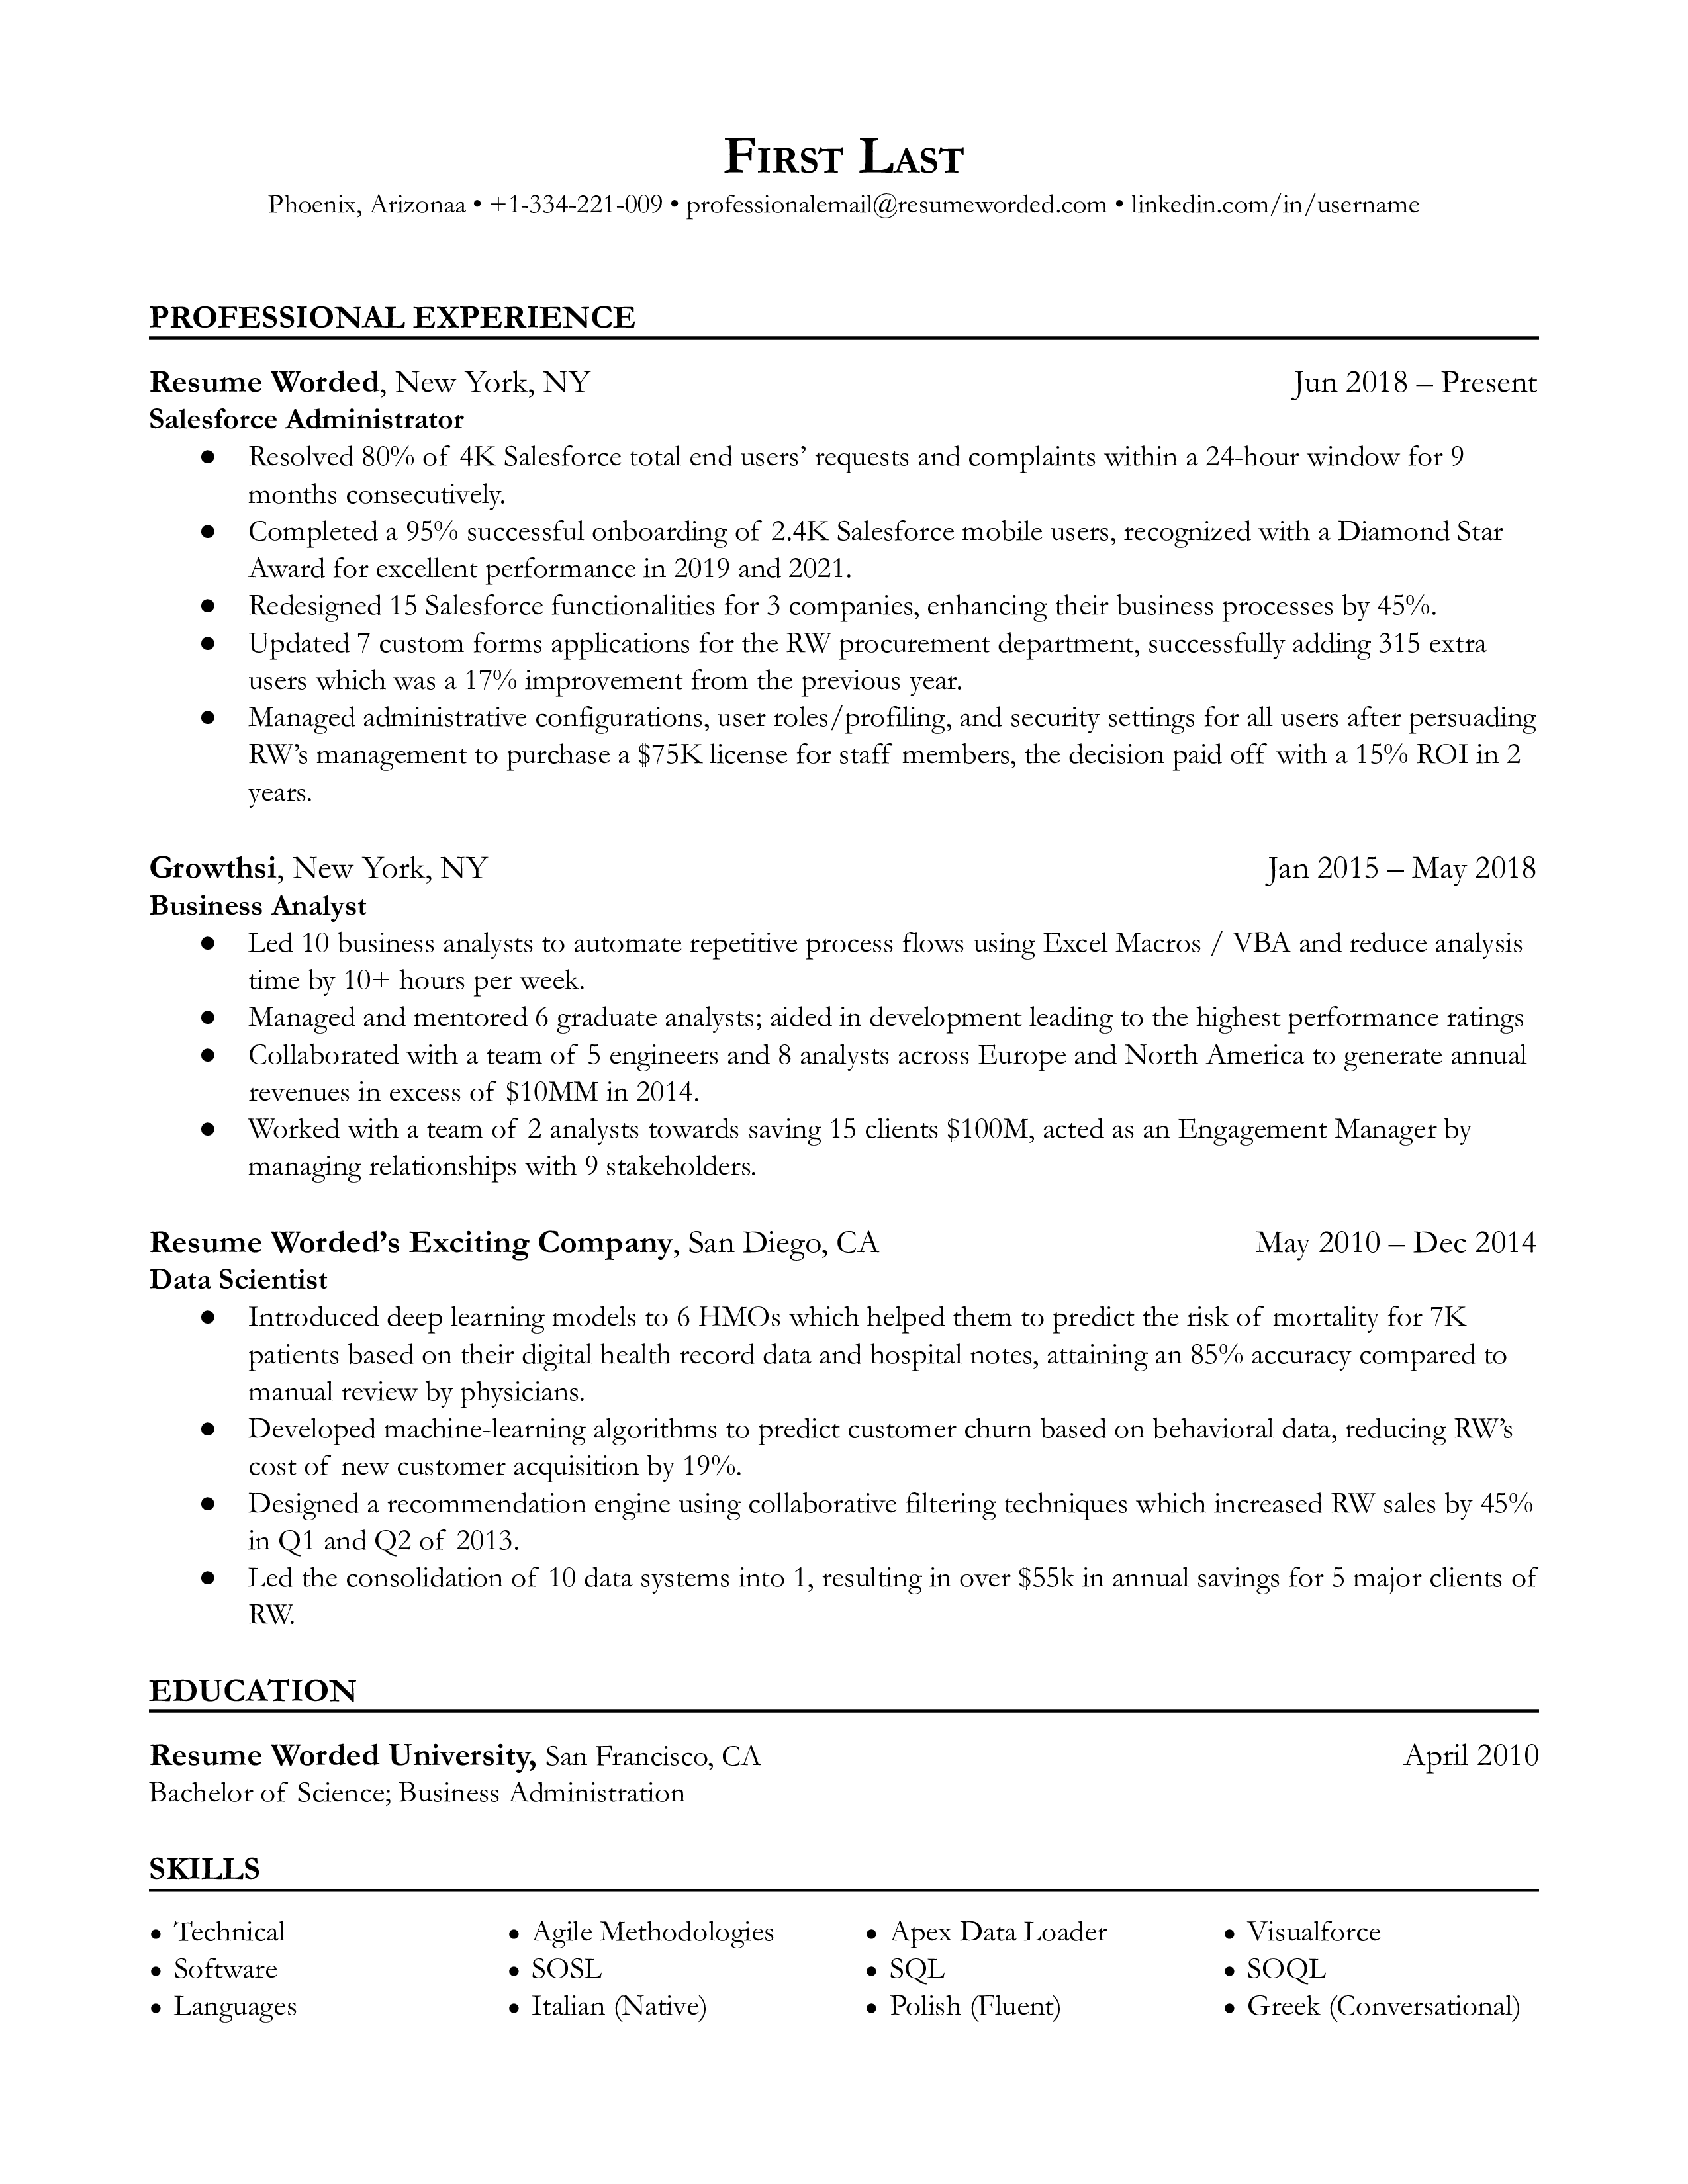 A well-structured Salesforce Administrator CV featuring certifications and hands-on experience.